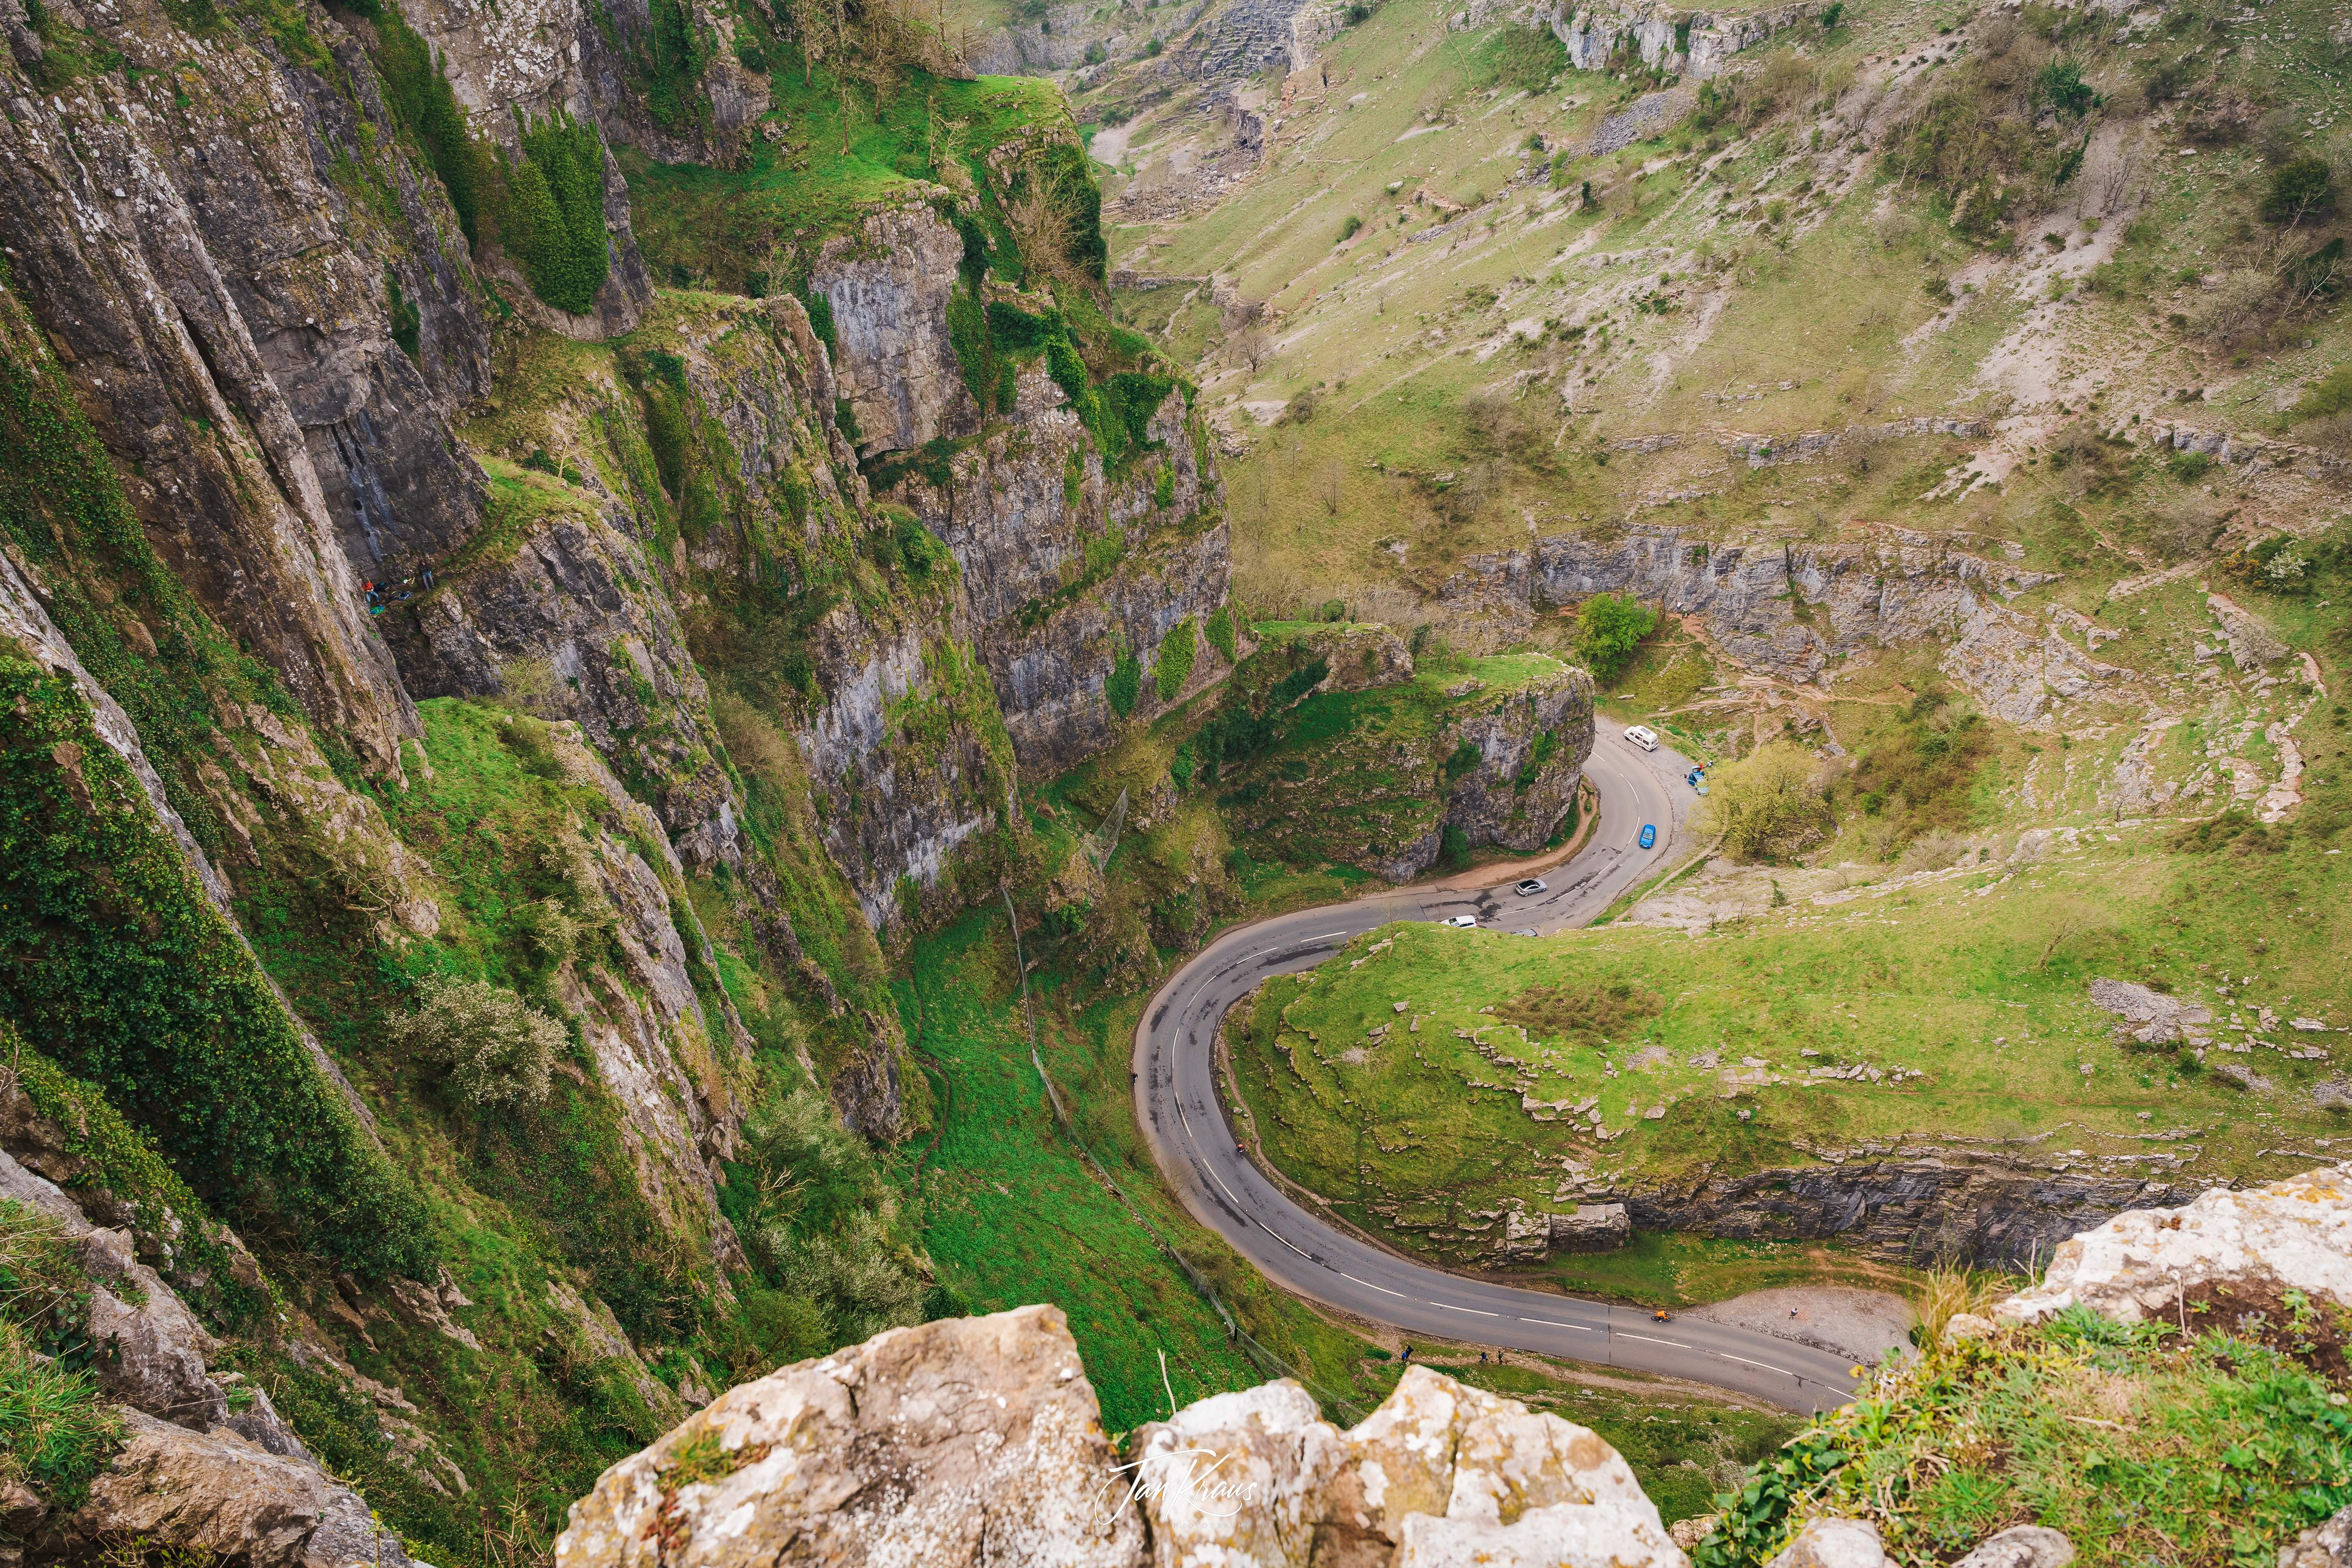 View over the B3135 road from the clifftops of Cheddar Gorge, facing the Cheddar Village, Somerset, England, UK